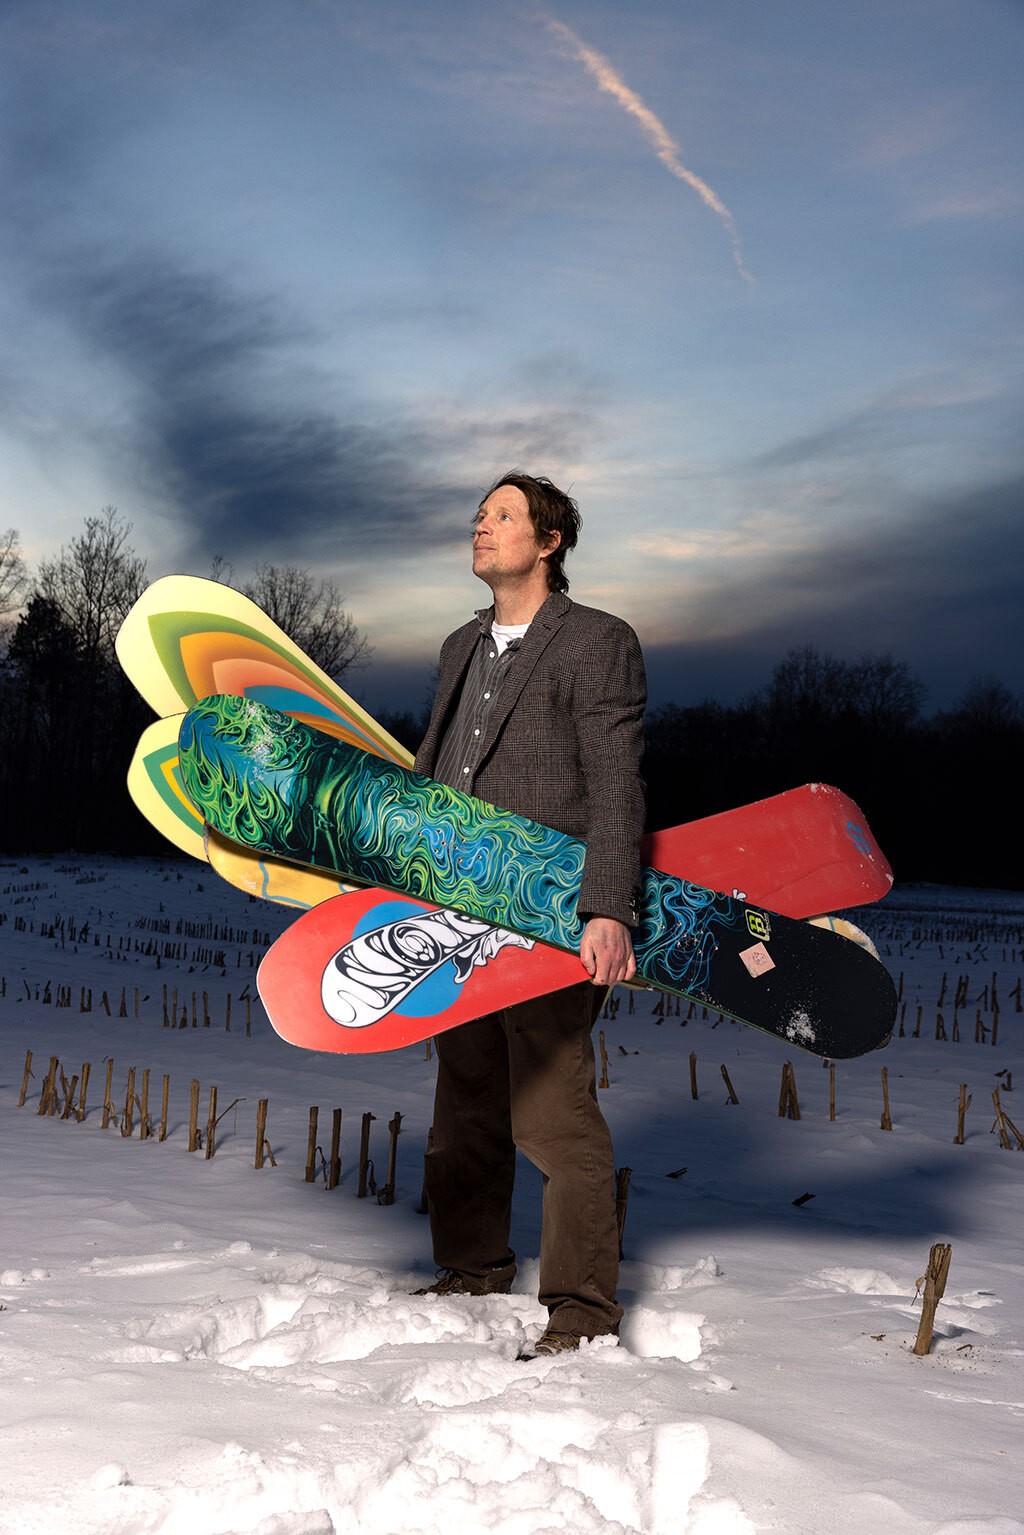 Snowboard, used by Shaun White  National Museum of American History